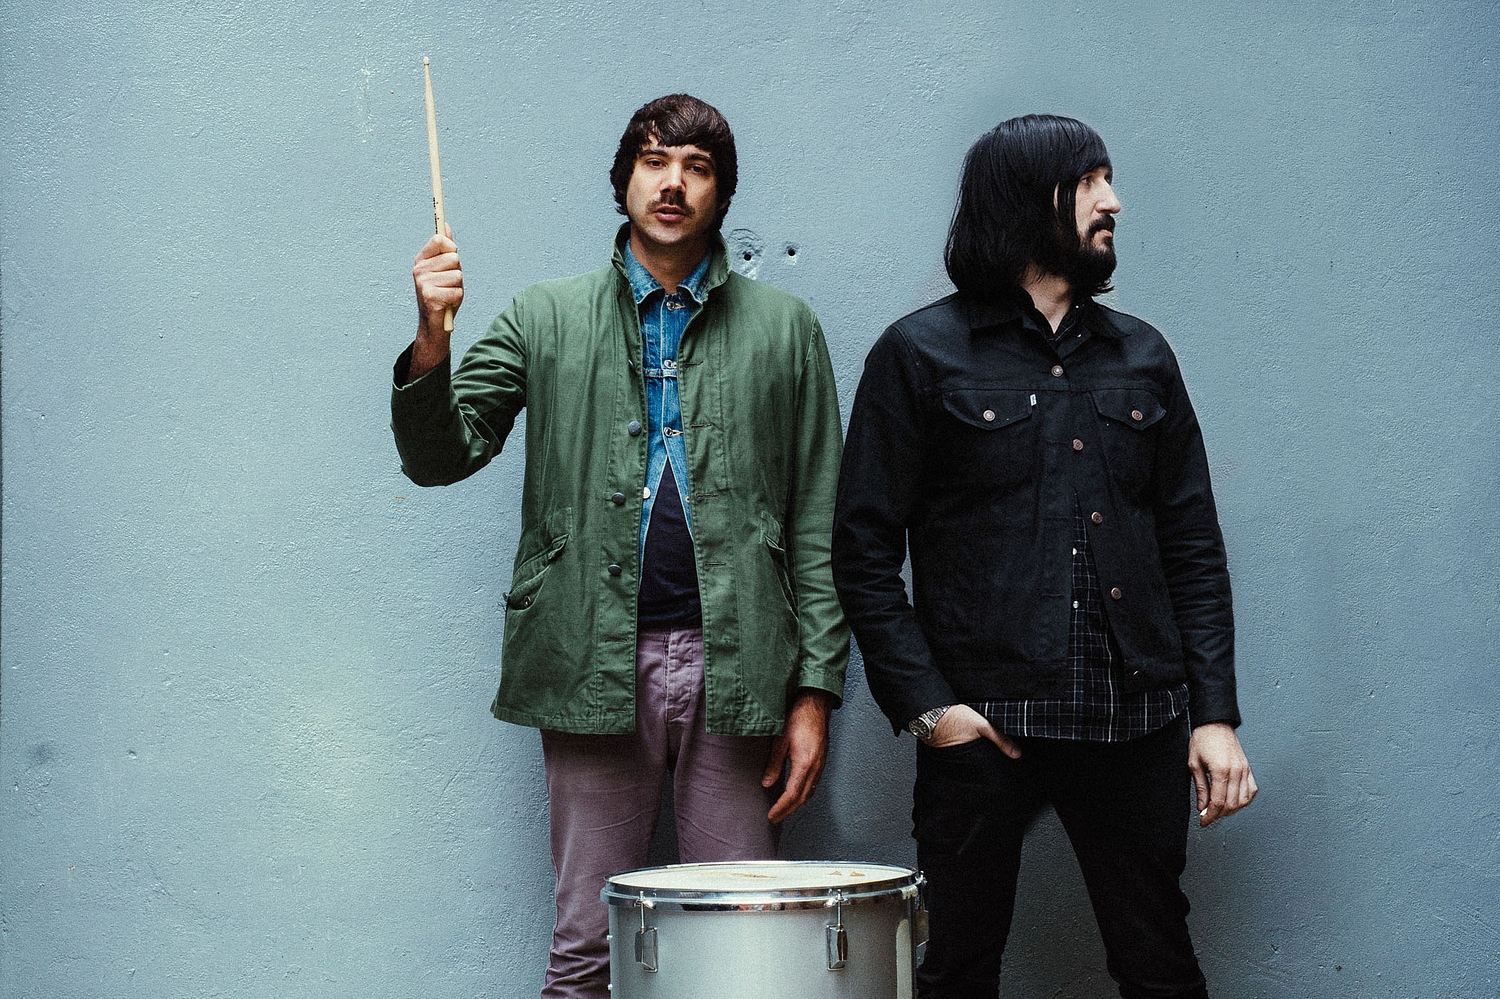 Death From Above 1979: "There was unfinished business"